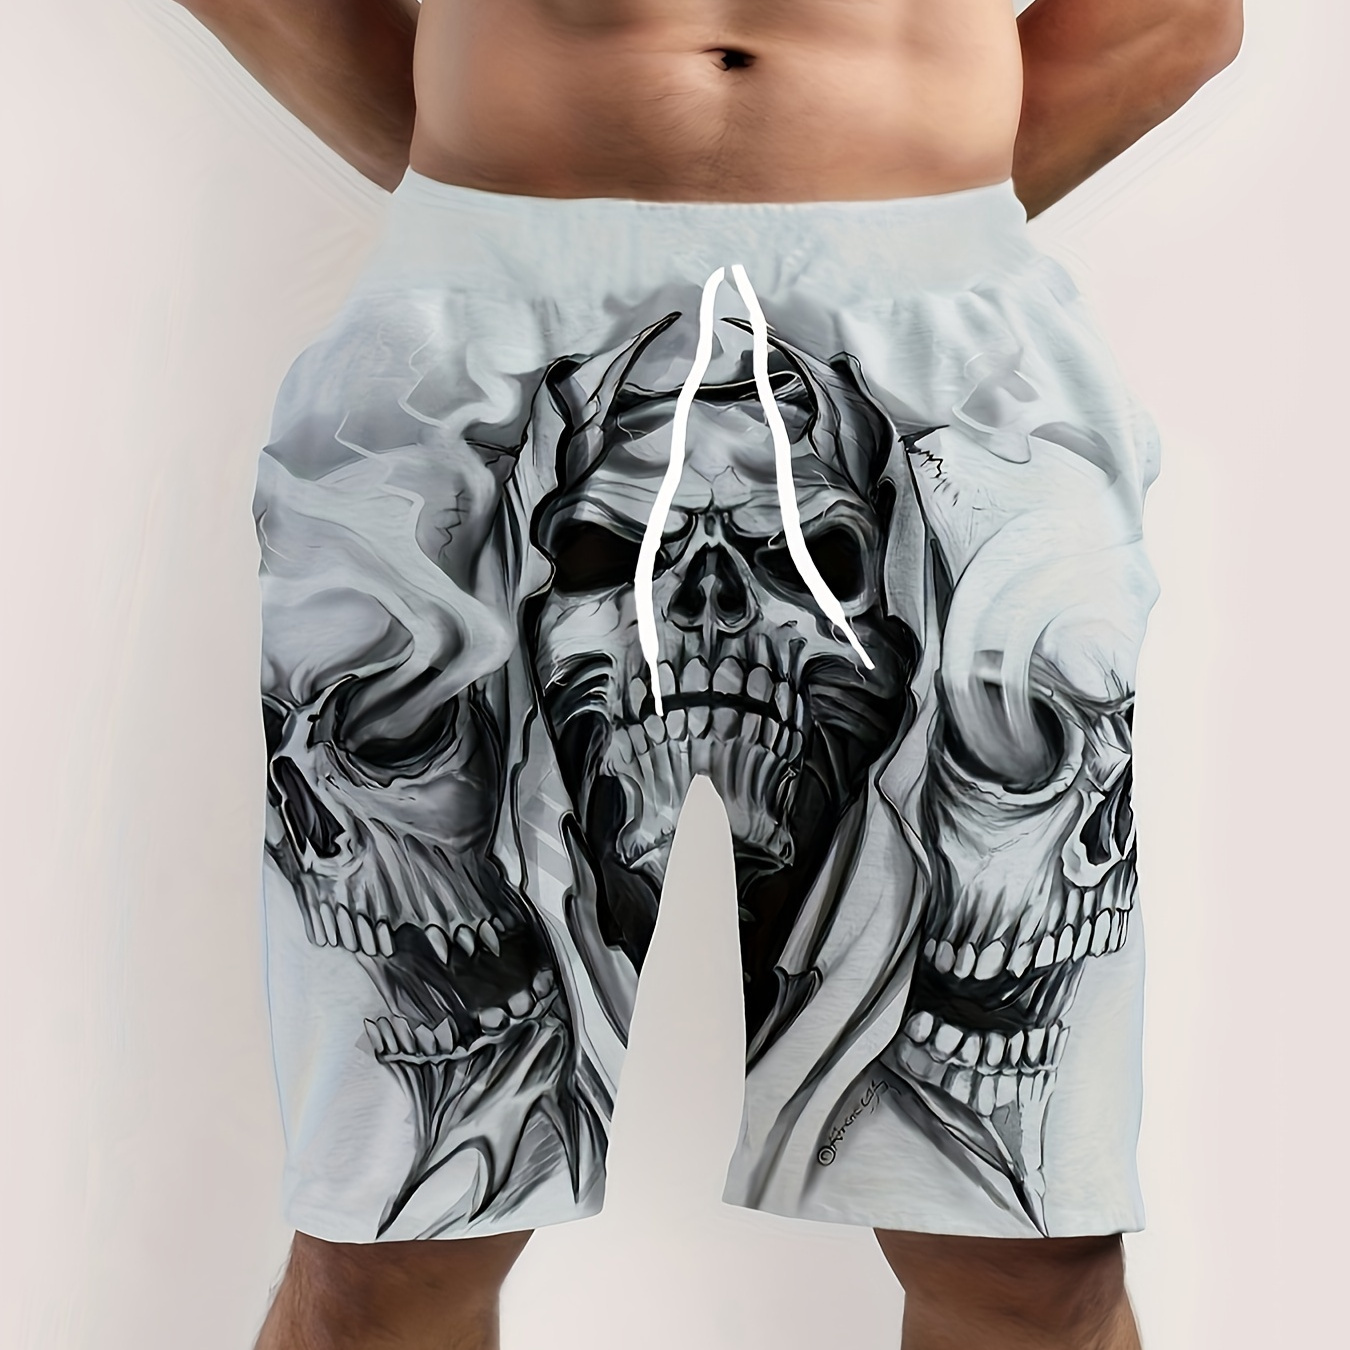 

Men's Retro Style Skull Illustration Pattern Sports Shorts With Drawstring And Pockets, Stylish And Cool Shorts For Summer Street And Sports Leisurewear